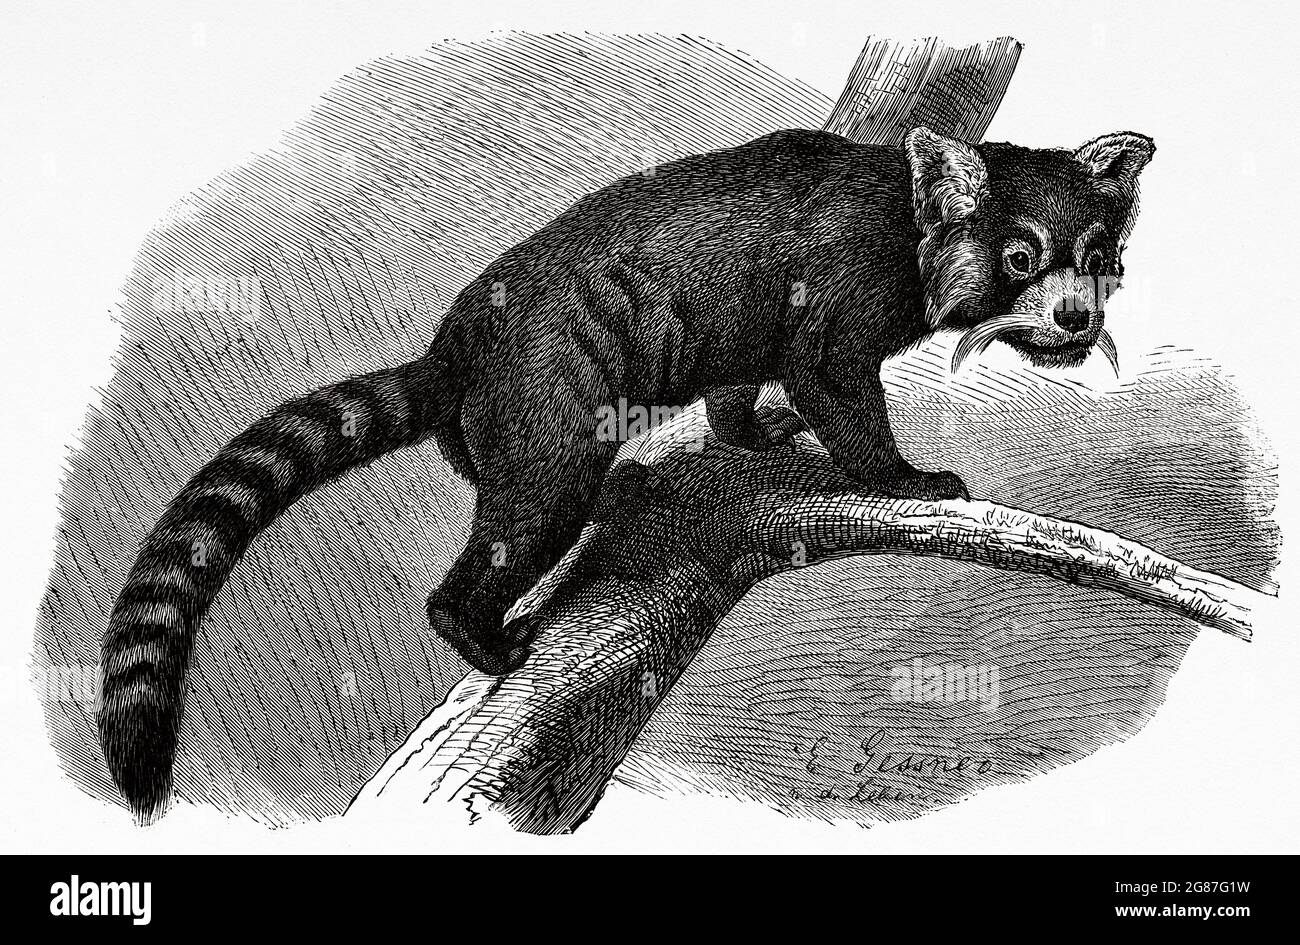 The red panda or lesser panda (Ailurus fulgens) is a species of carnivorous mammal of the Ailuridae family. Old 19th century engraved illustration from El Mundo Ilustrado 1880 Stock Photo